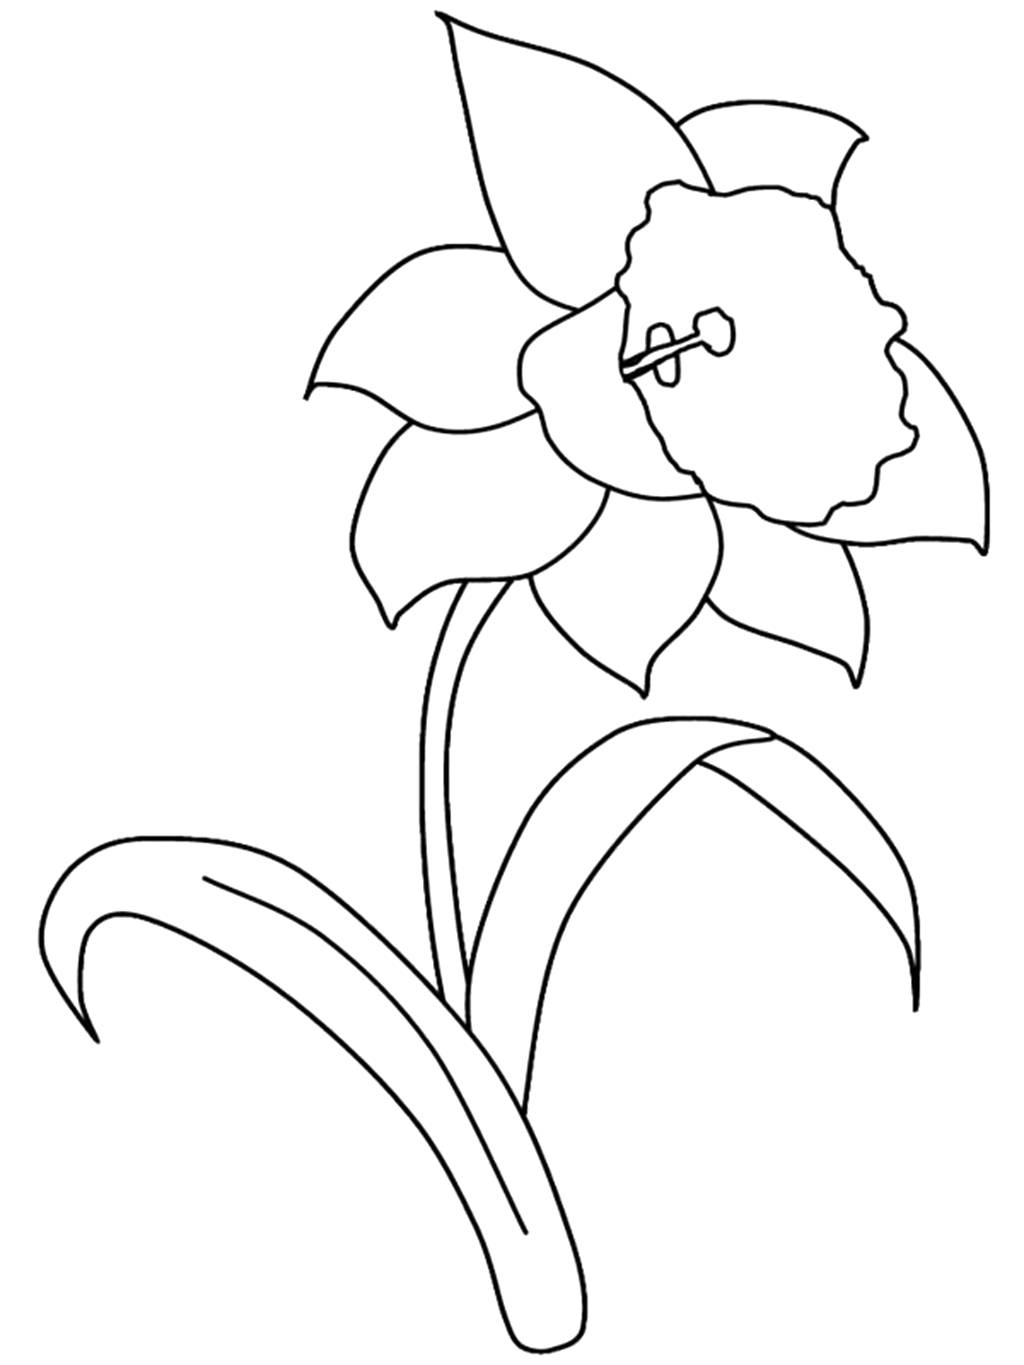 daffodil-line-drawing-rapunzel-flowers-coloring-print-lying-game